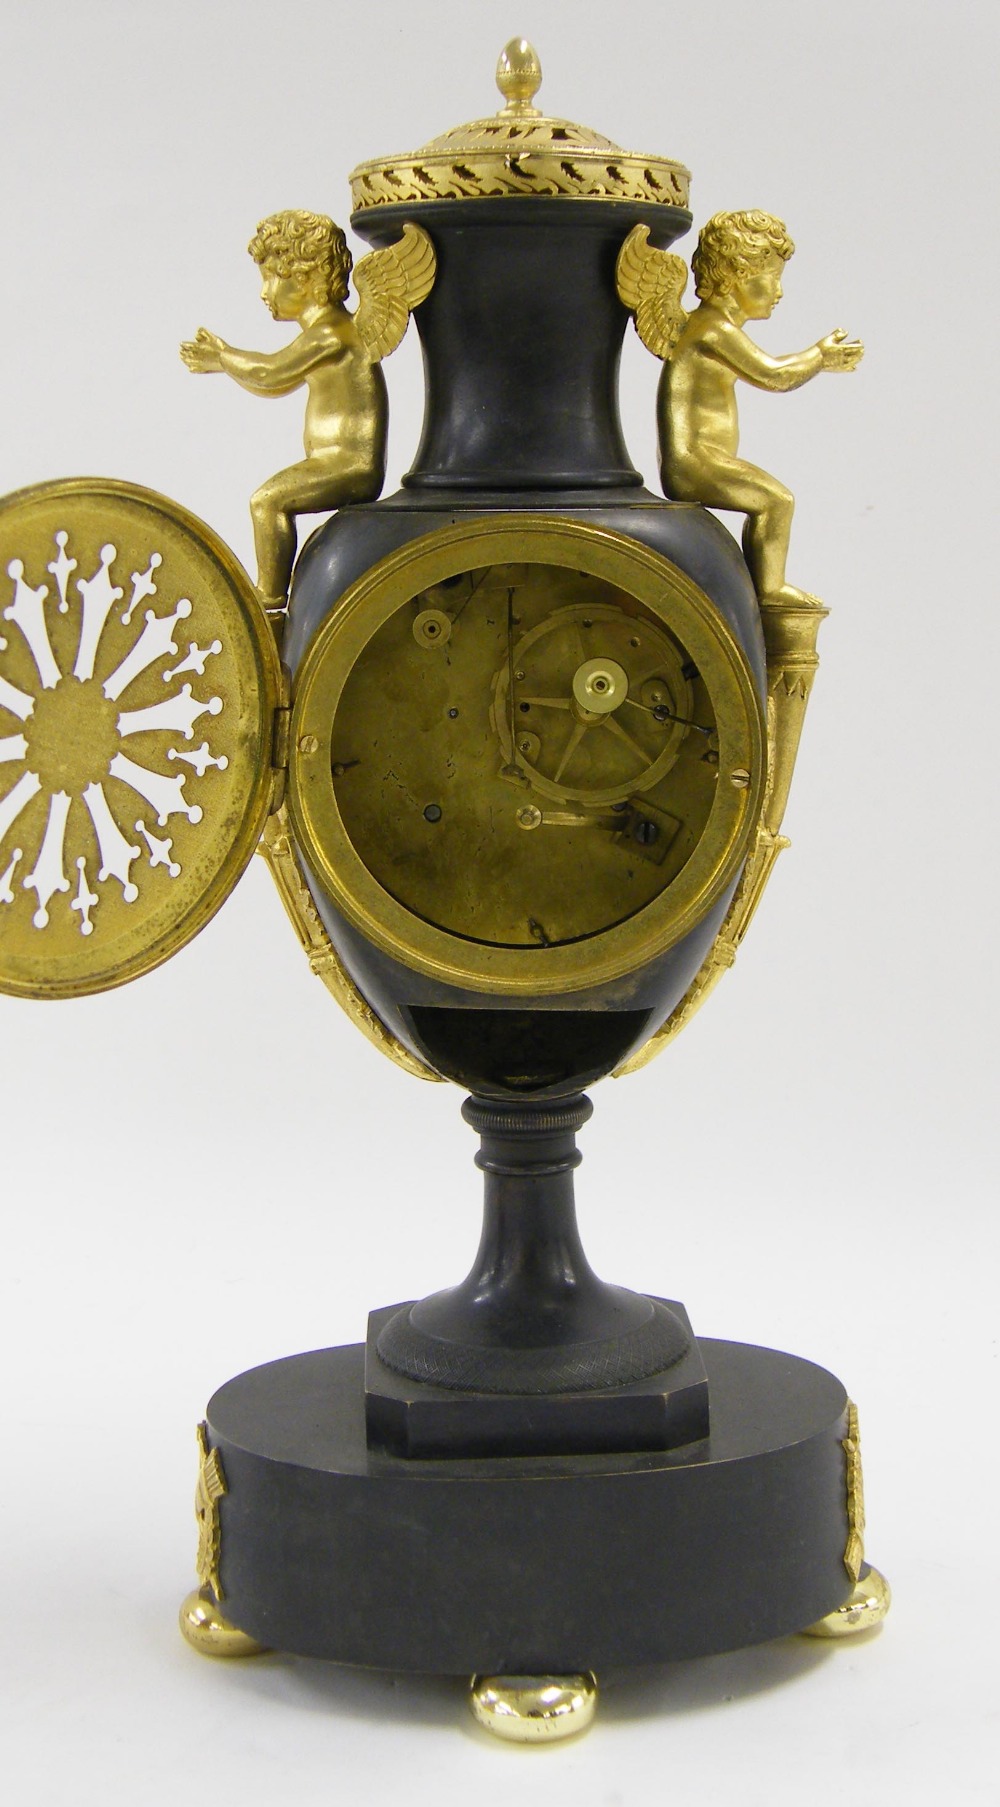 Bronze and ormolu two train urn mantel clock, the movement with outside countwheel striking on a - Image 2 of 2